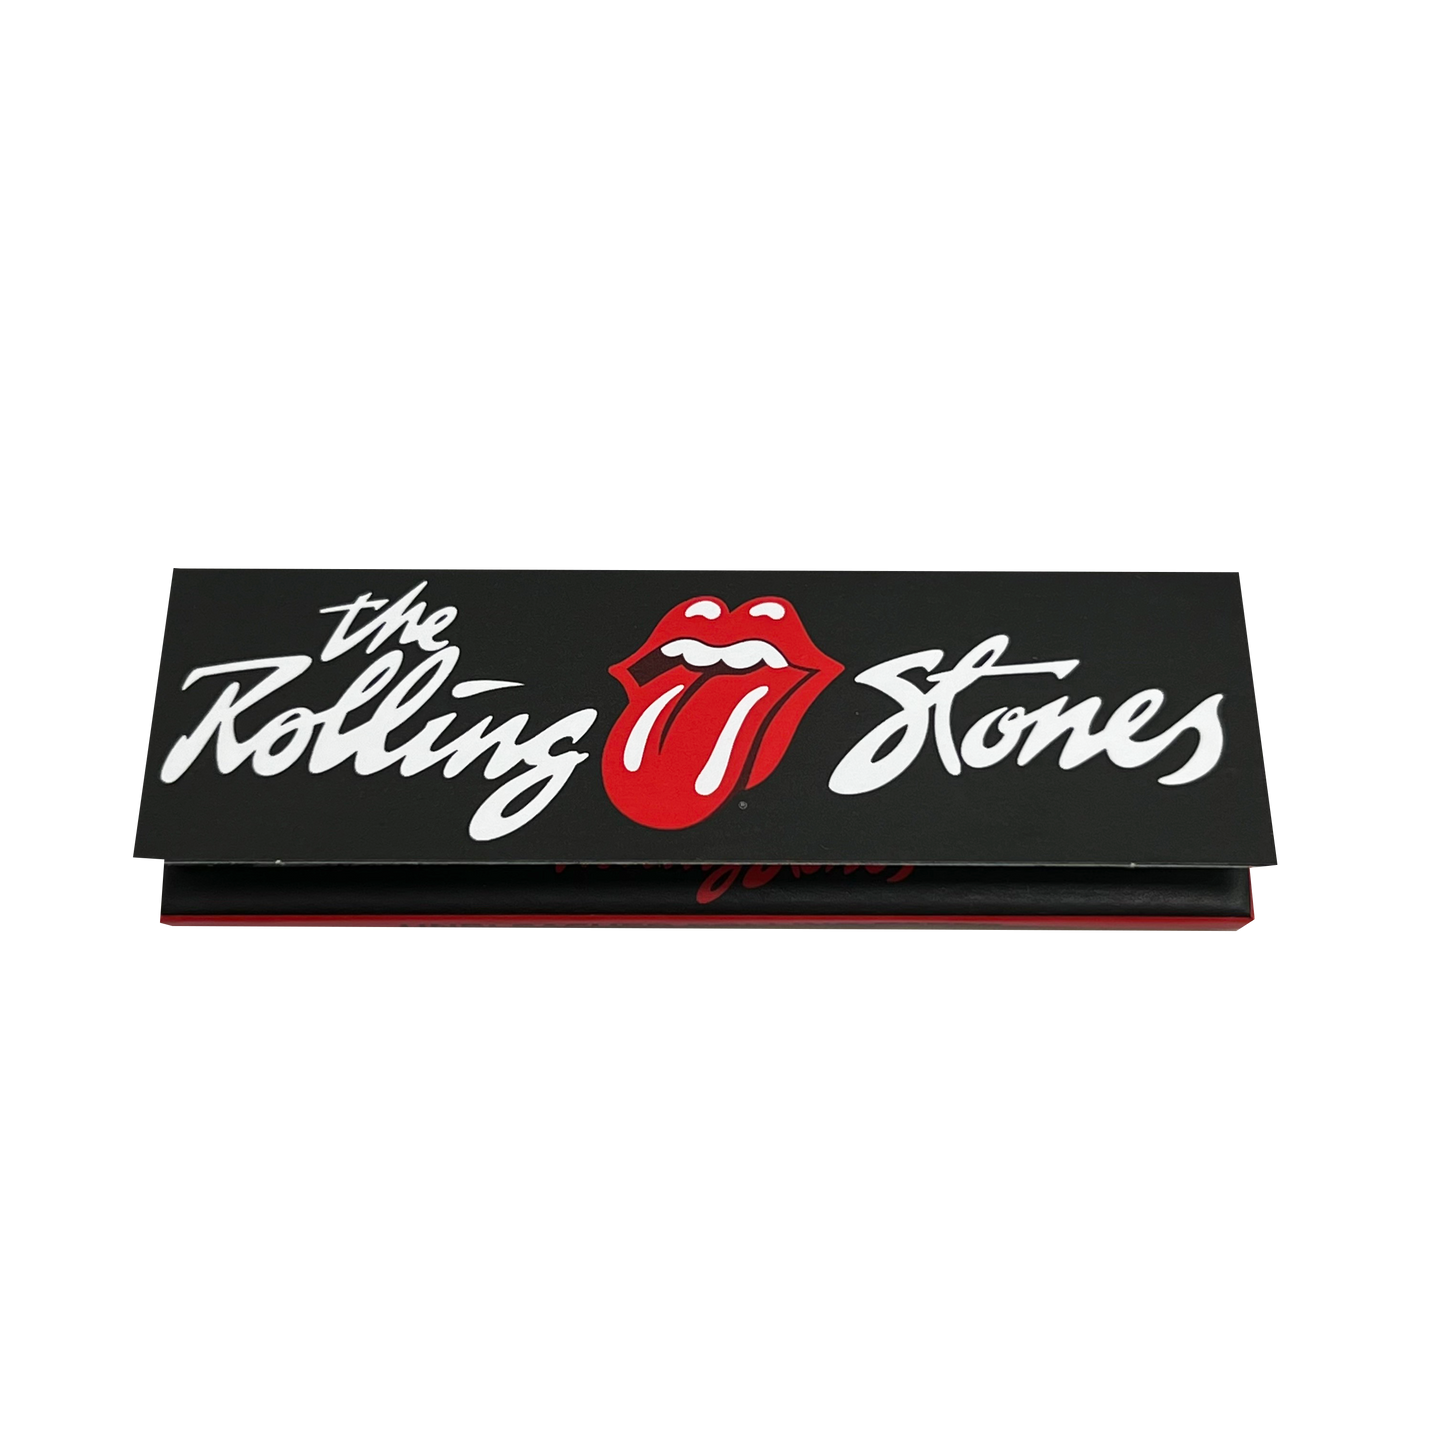 UNBLEACHED 1.1/4 ROLLING STONES